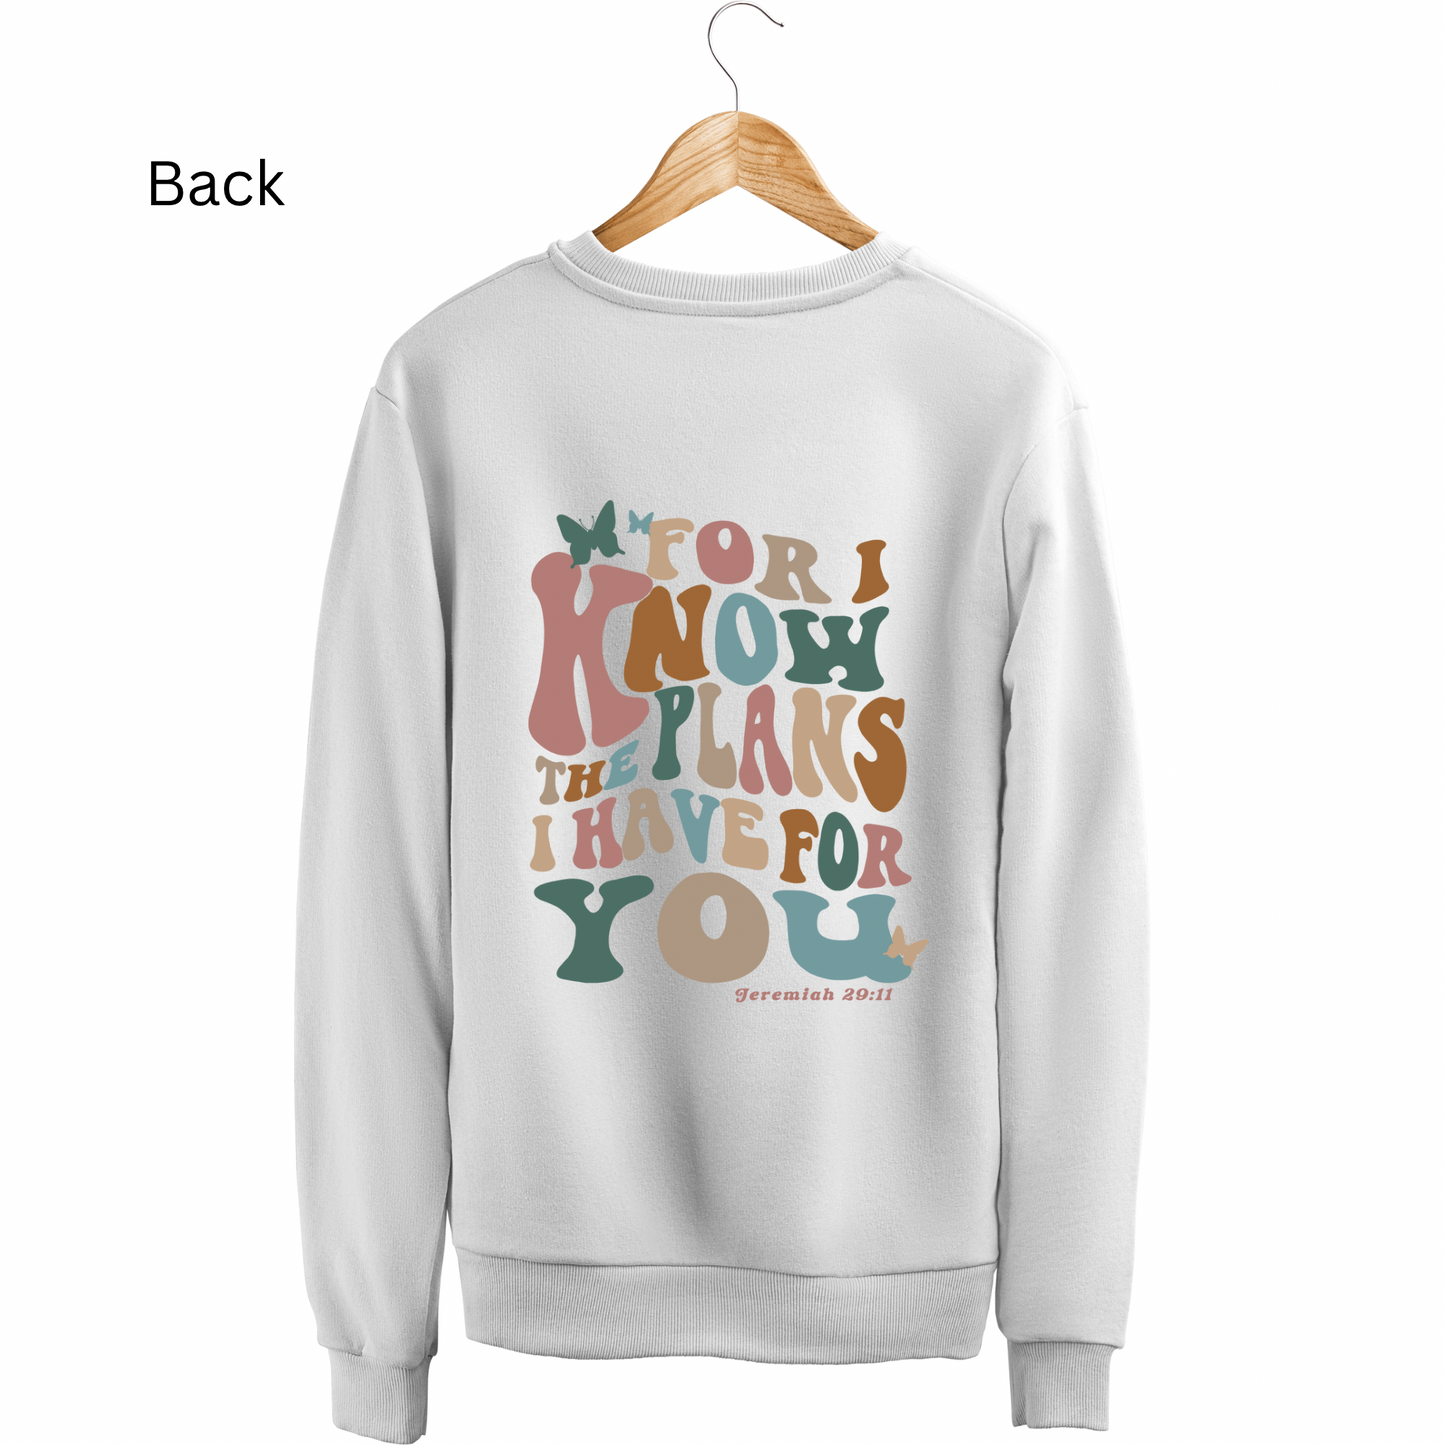 I Know The Things I Have Planned For You Graphic Sweatshirt